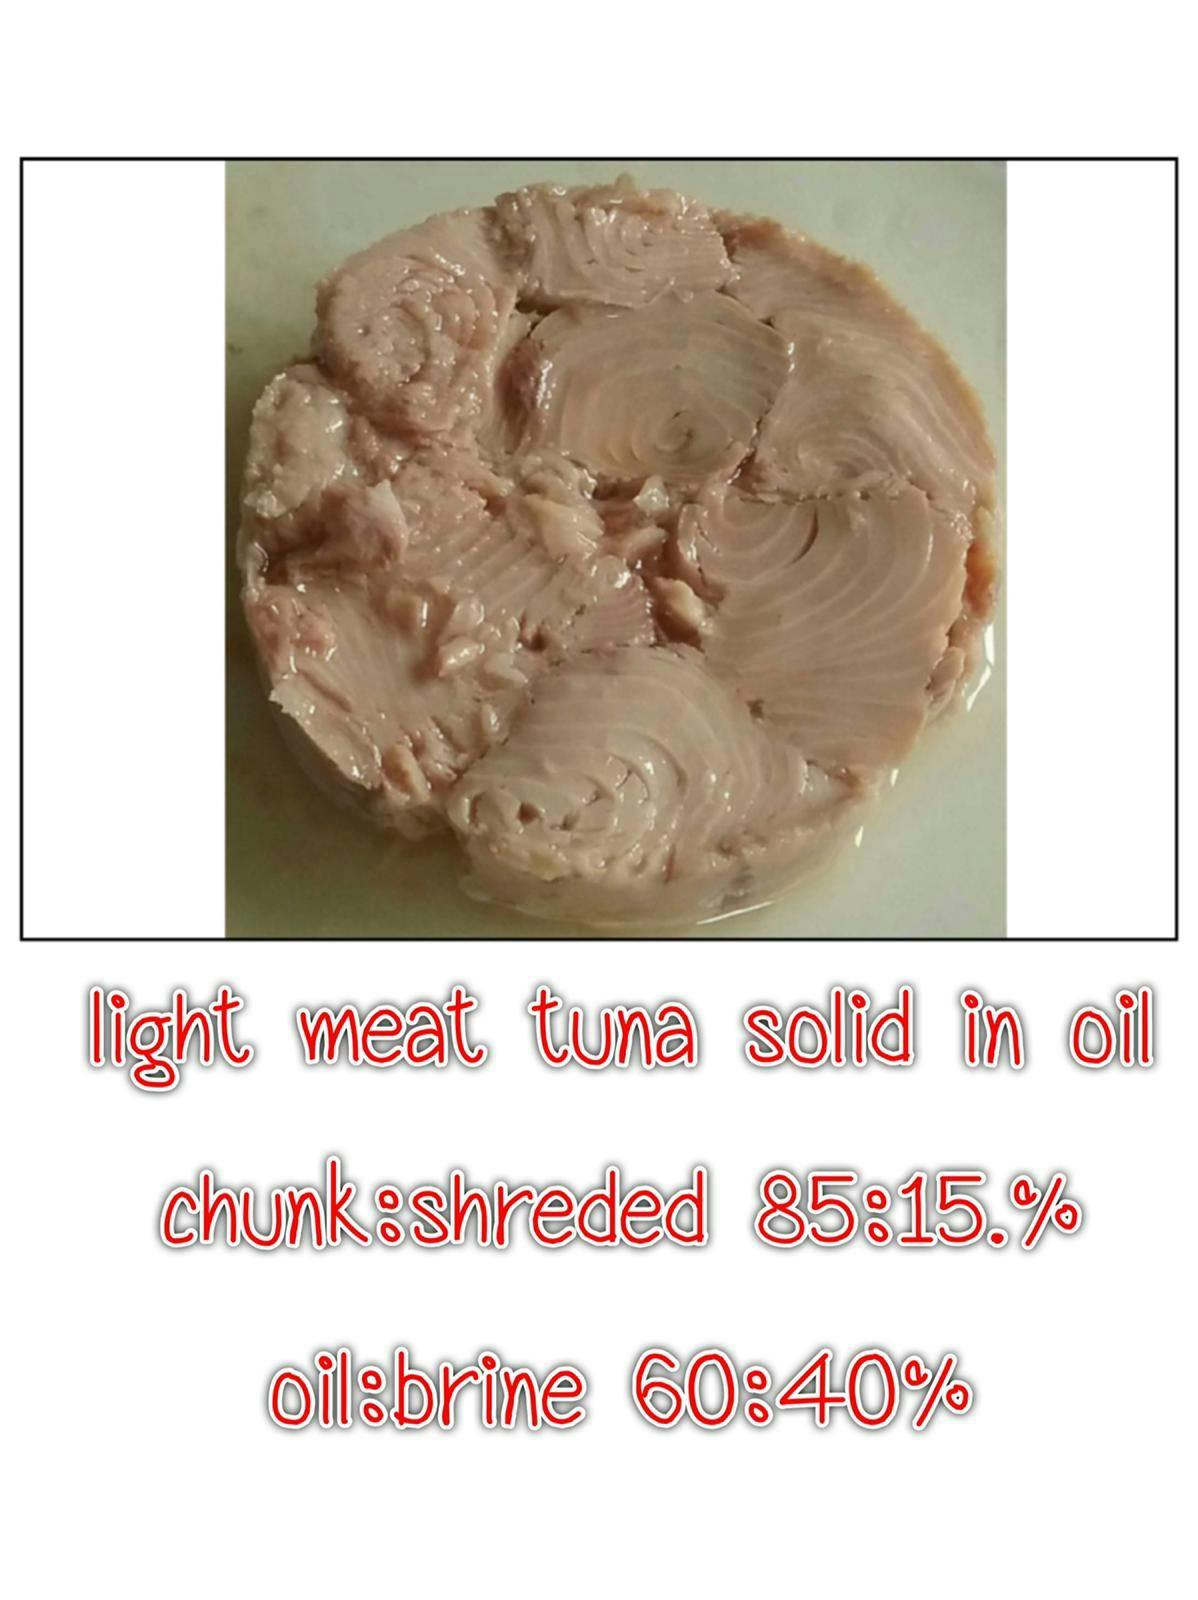 OEM light meat tuna canned best quality produce most popular from Thailand